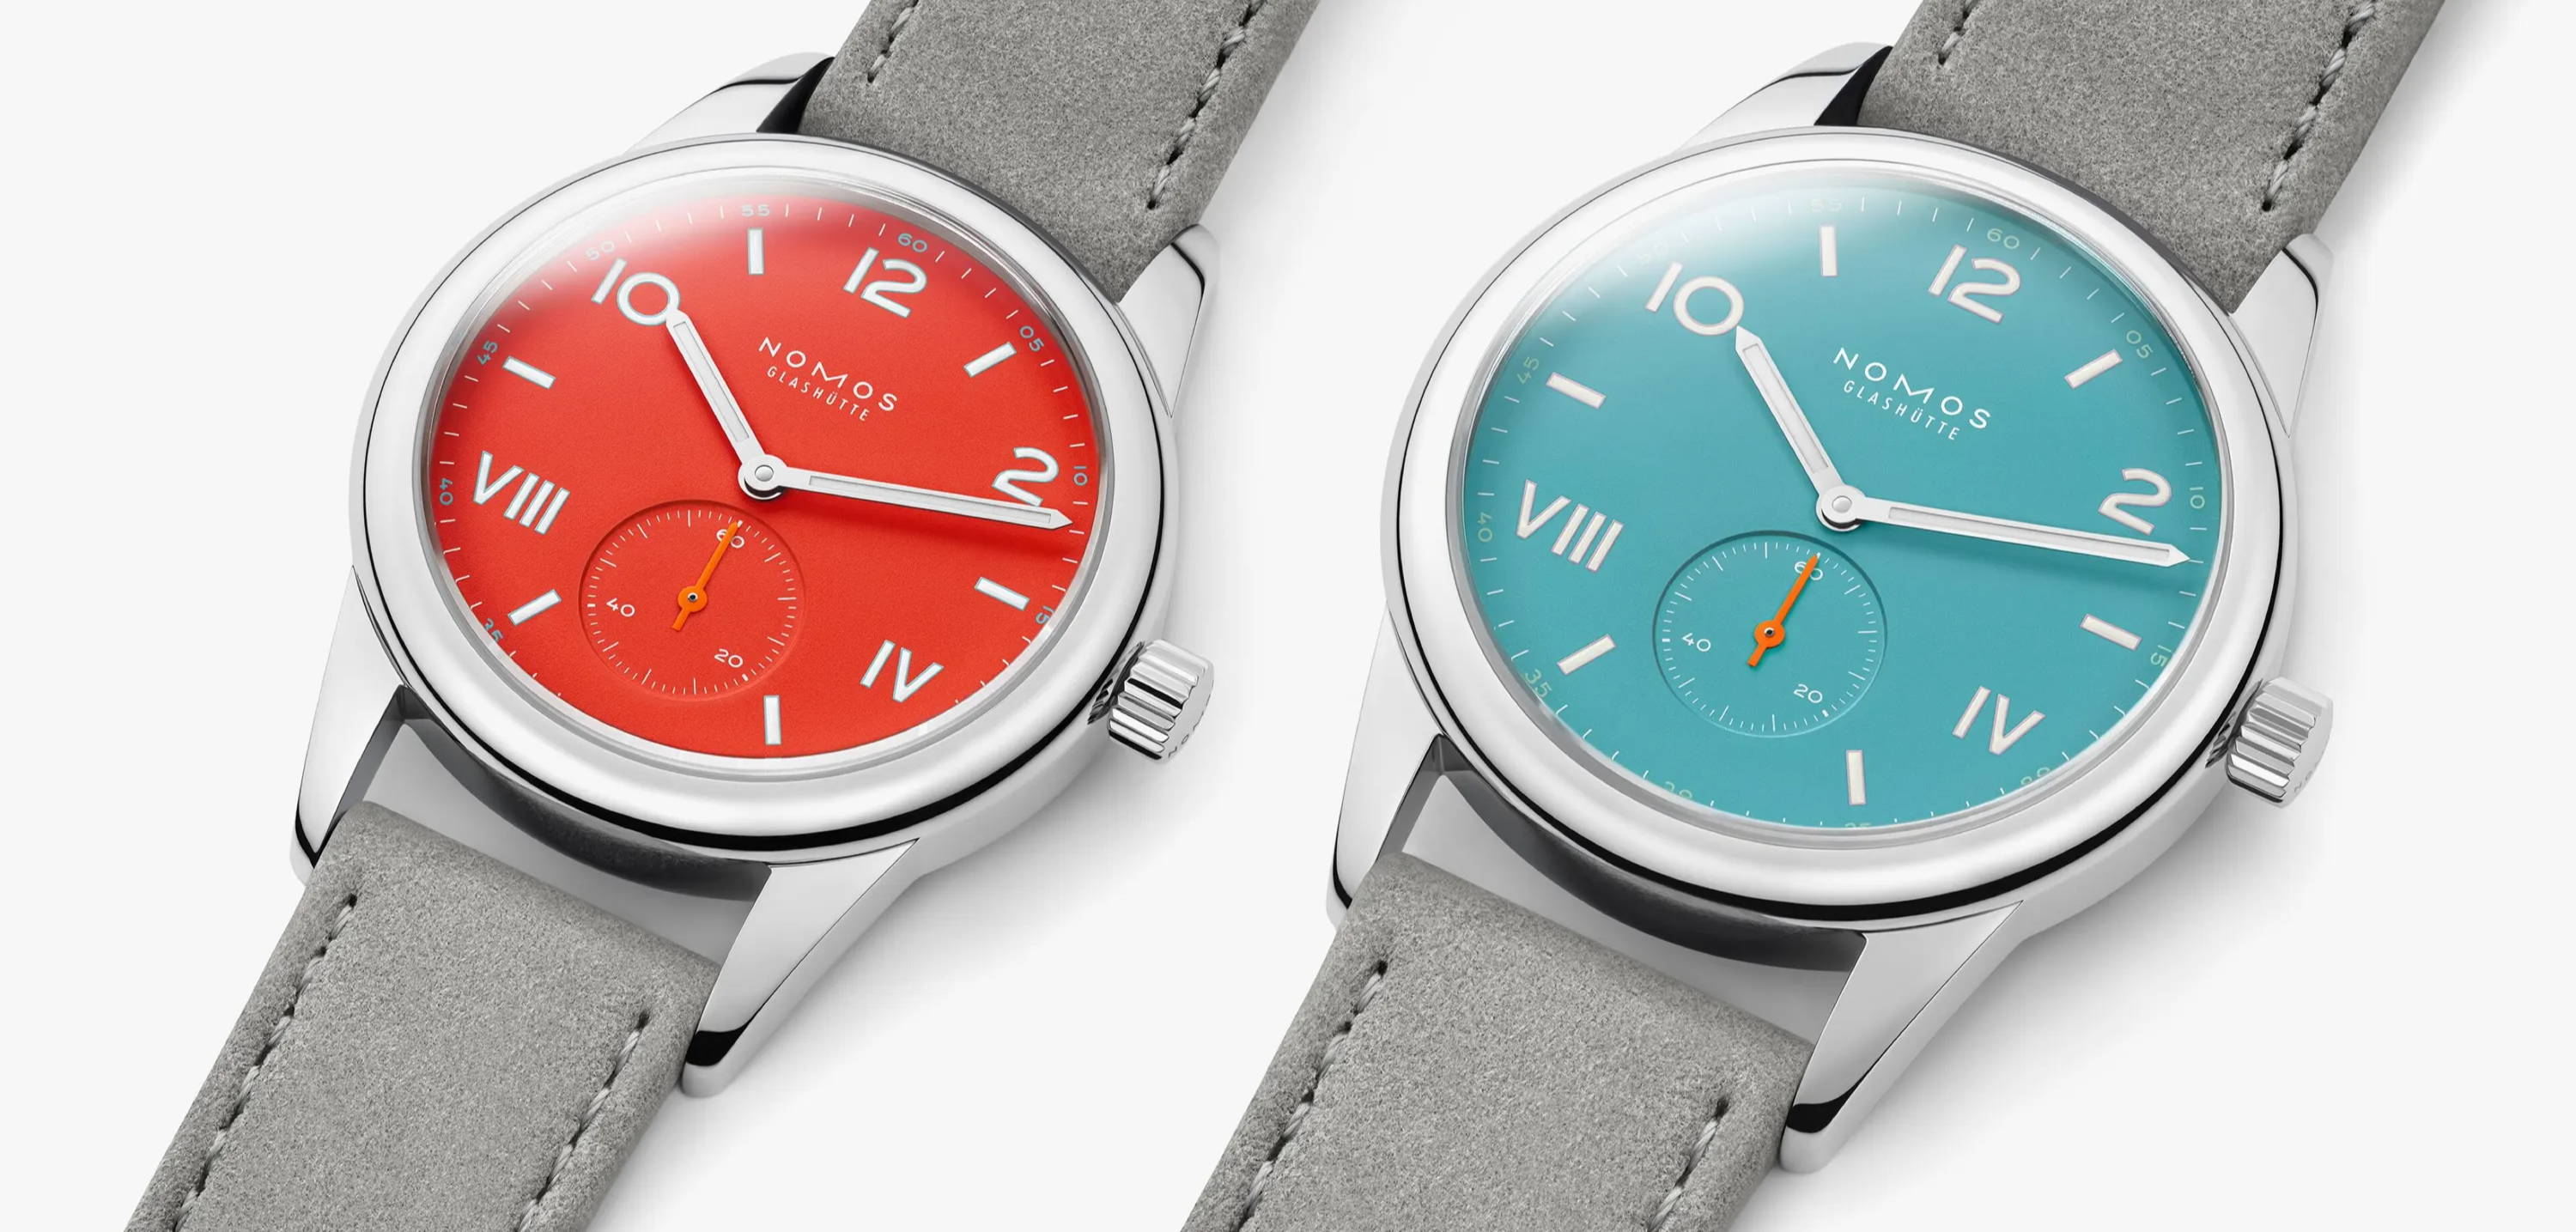 Nomos Glashutte Watches with Turquoise and Red Dials